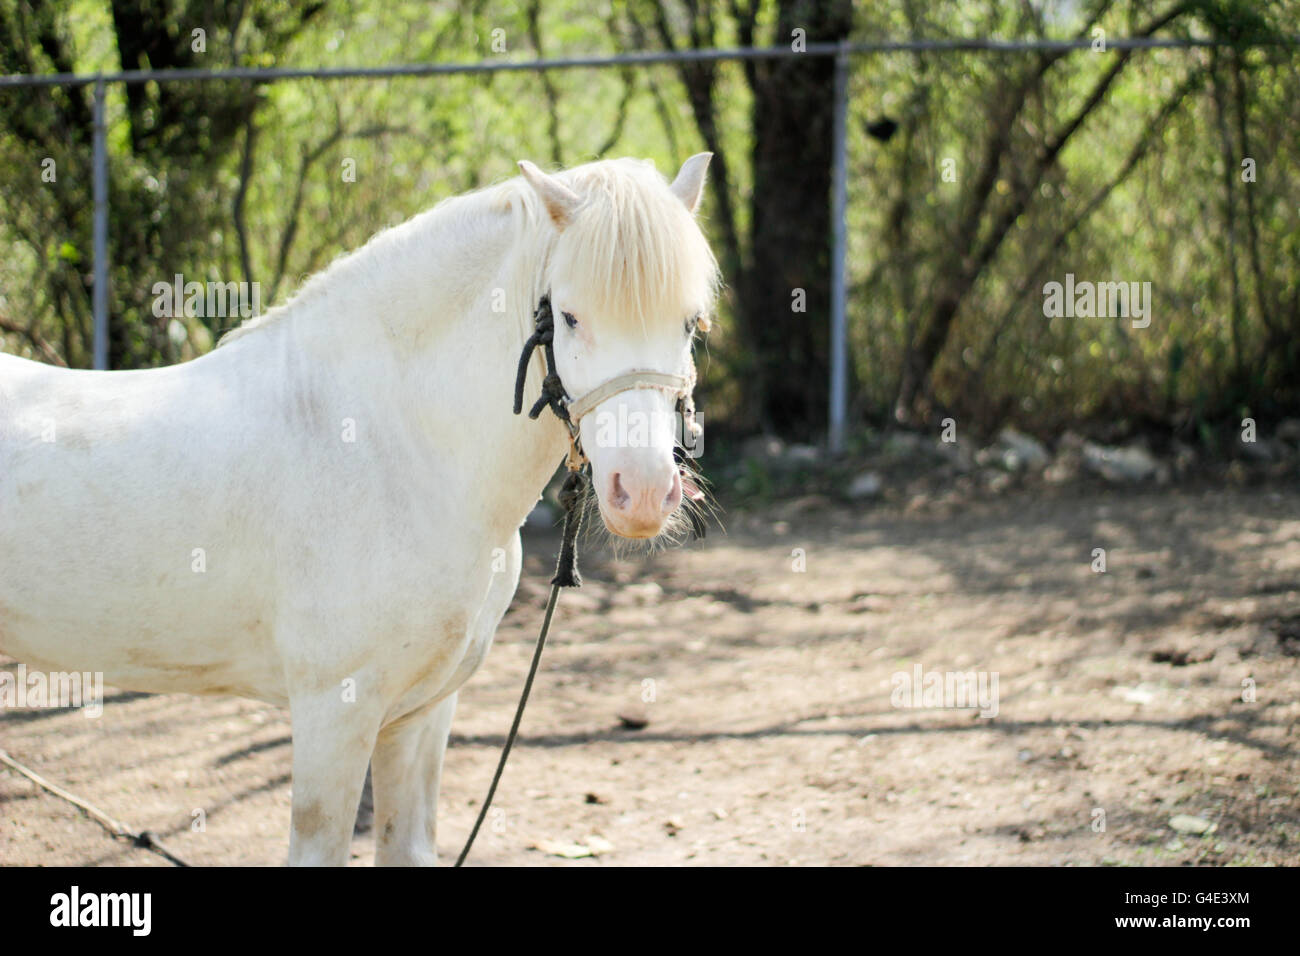 Photograph of a white horse Stock Photo